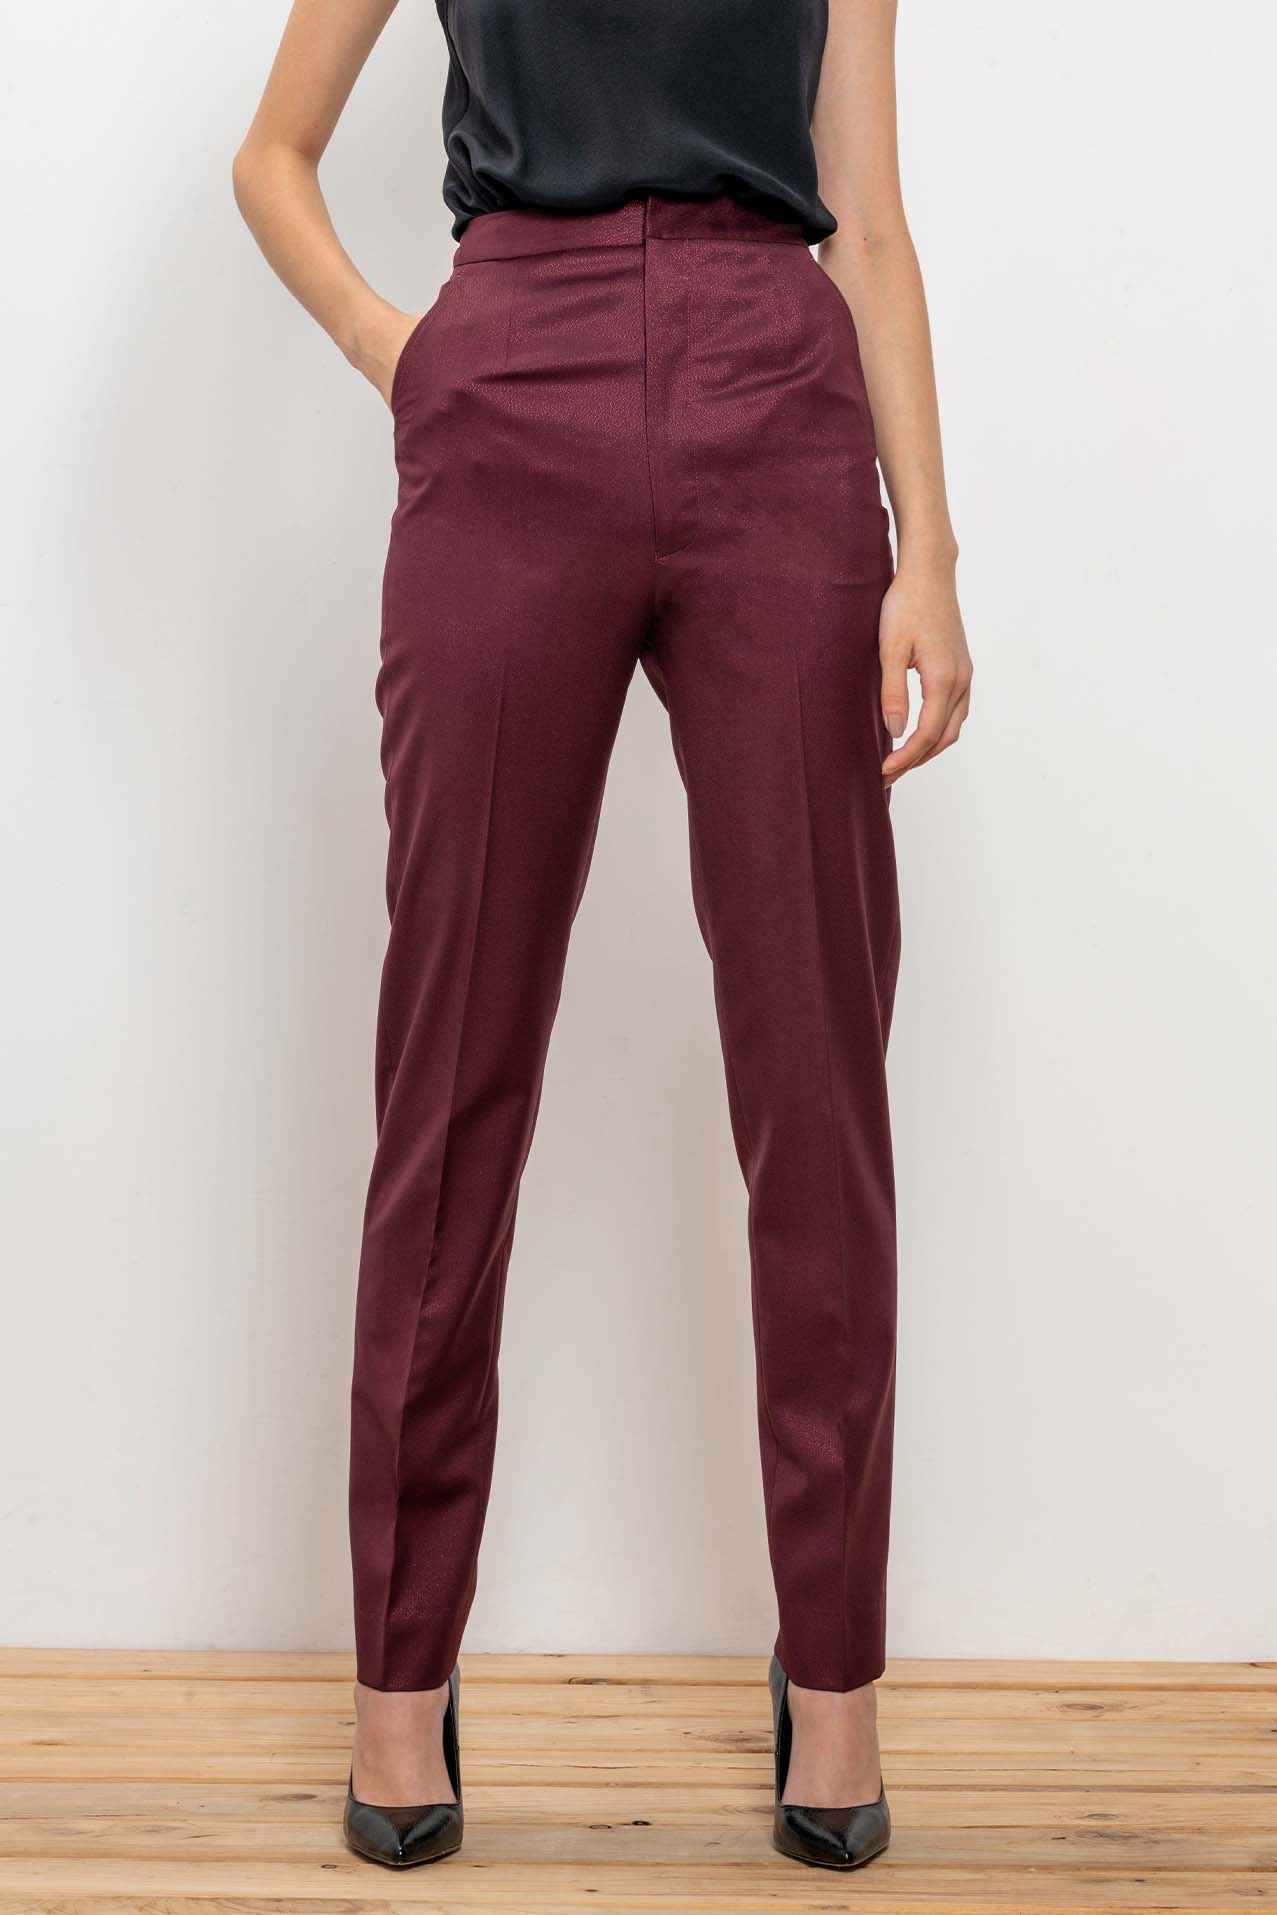 women-s-high-waisted-pants-for-work-wool-blend-custom-made-to-measure